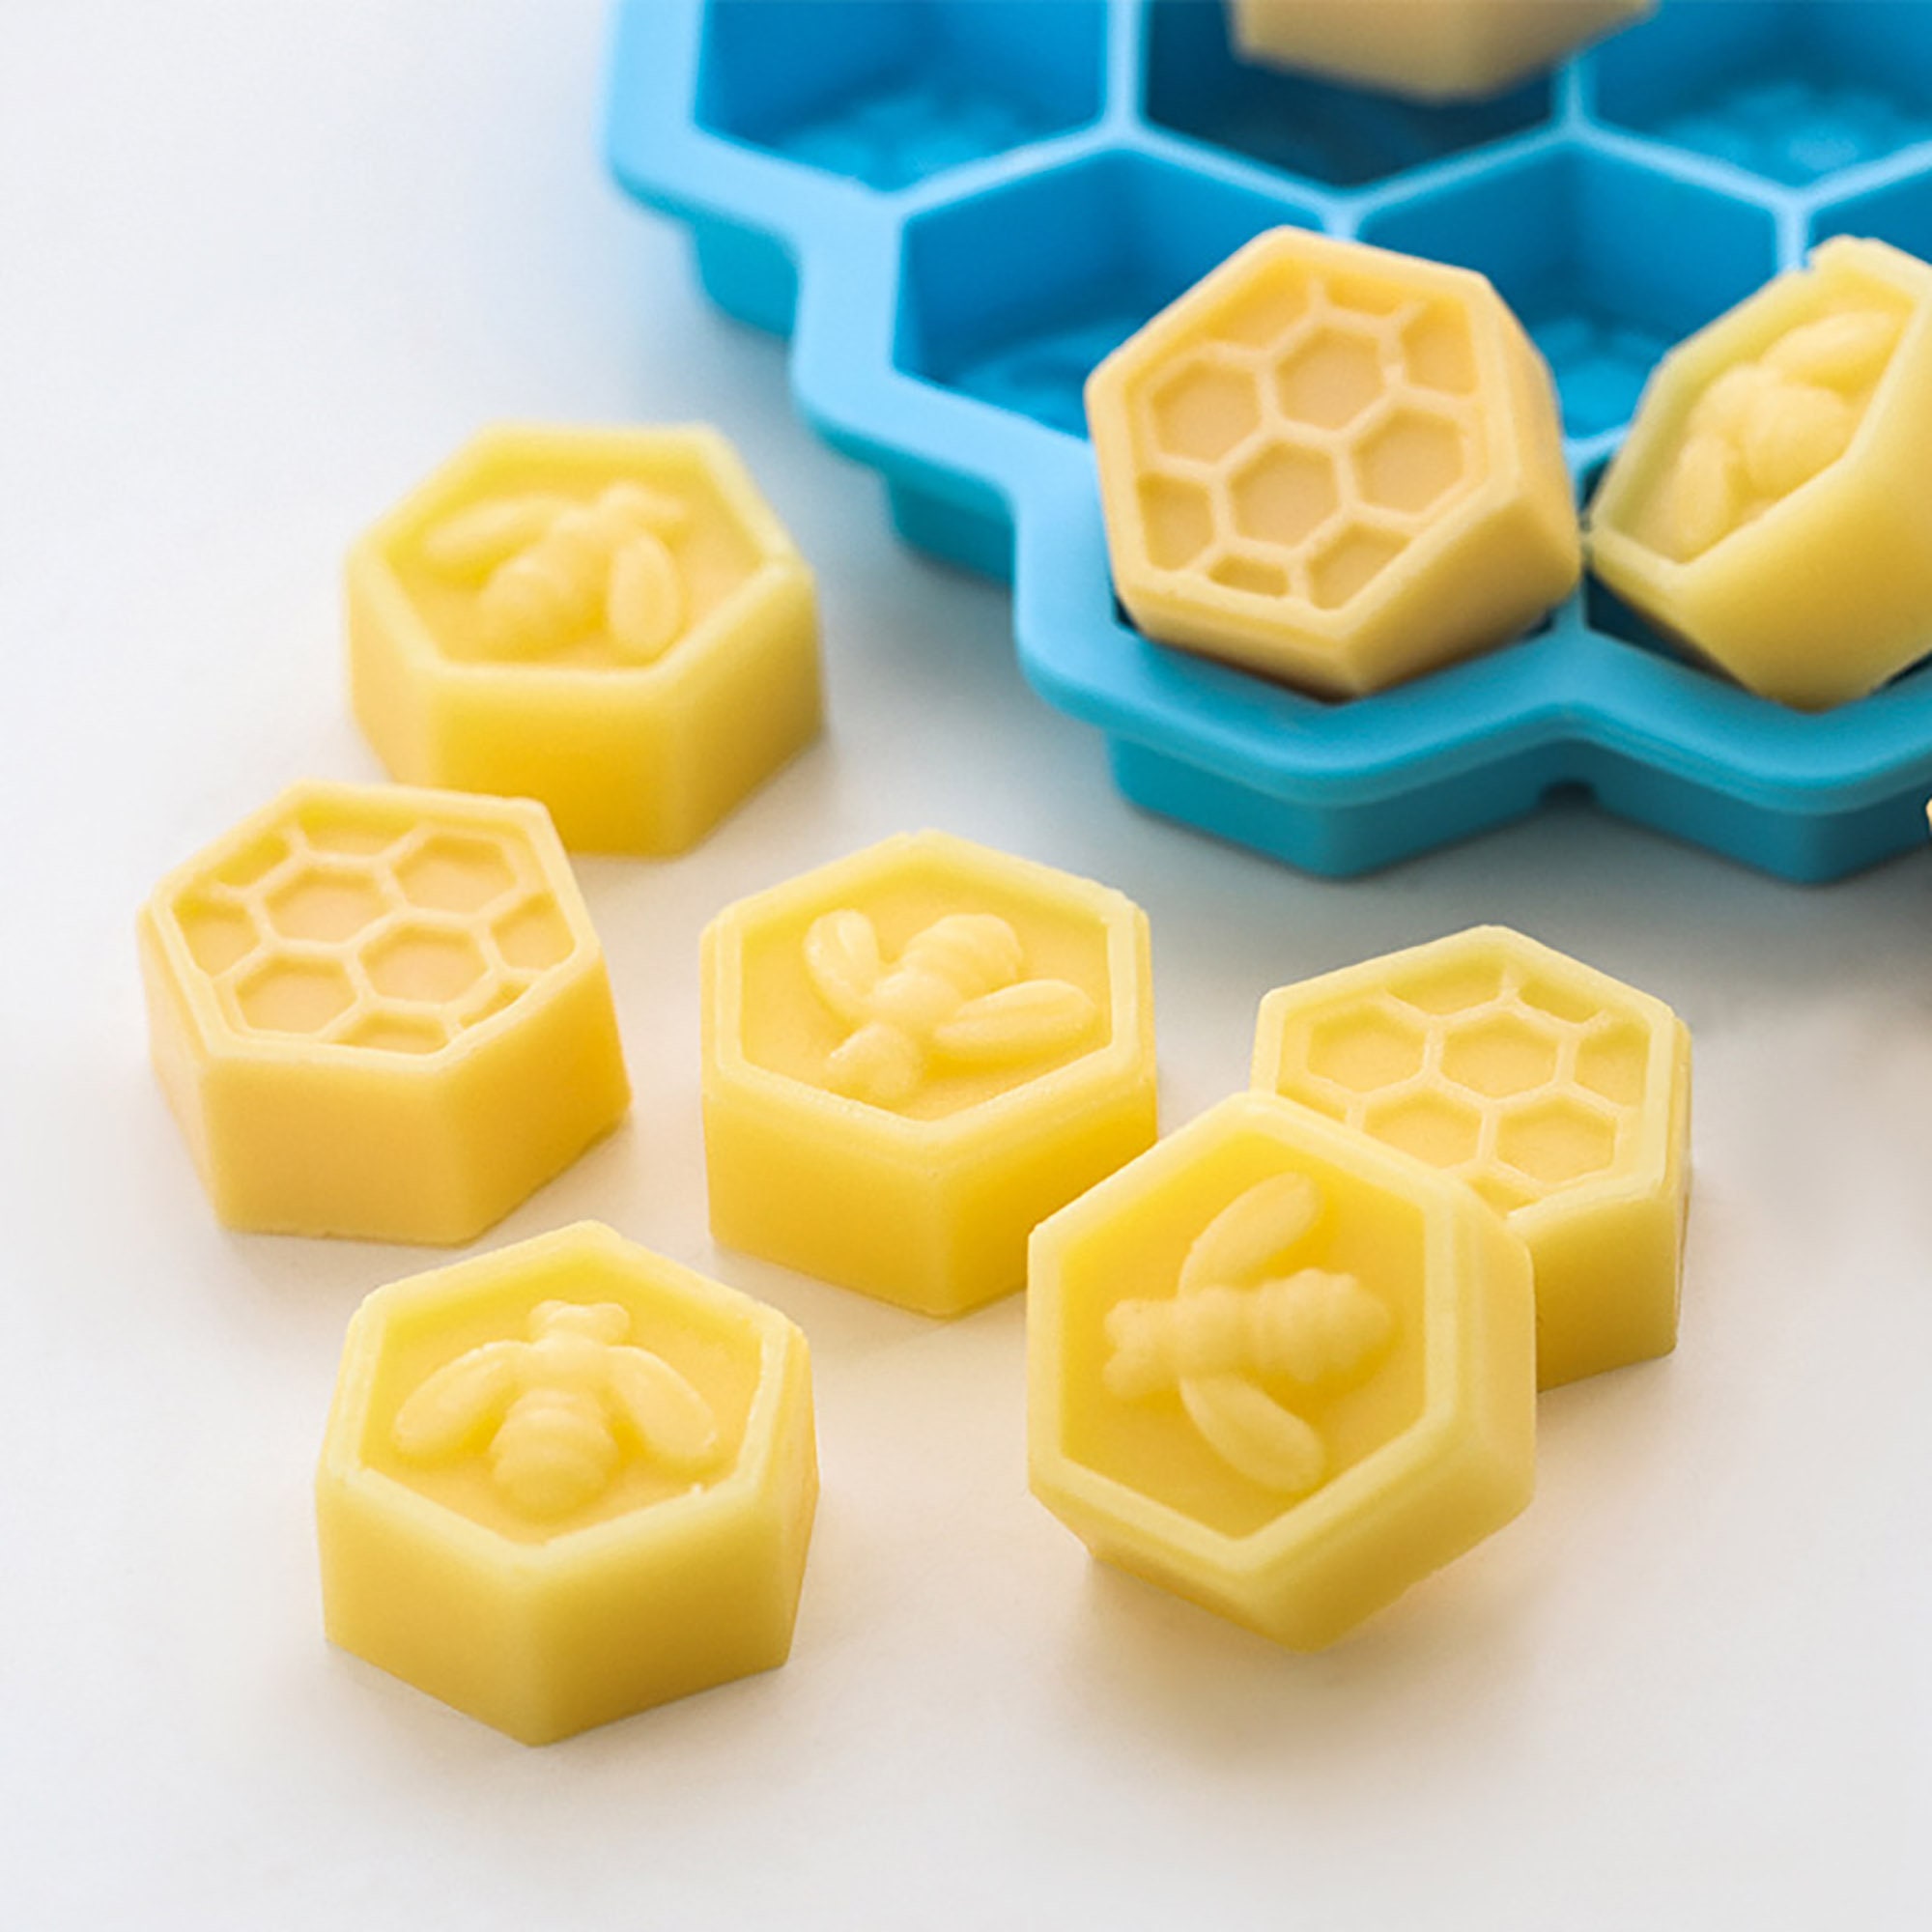 4pcs Bumble Bee Silicone Mold Honeycomb Bees Chocolate Moulds Bee